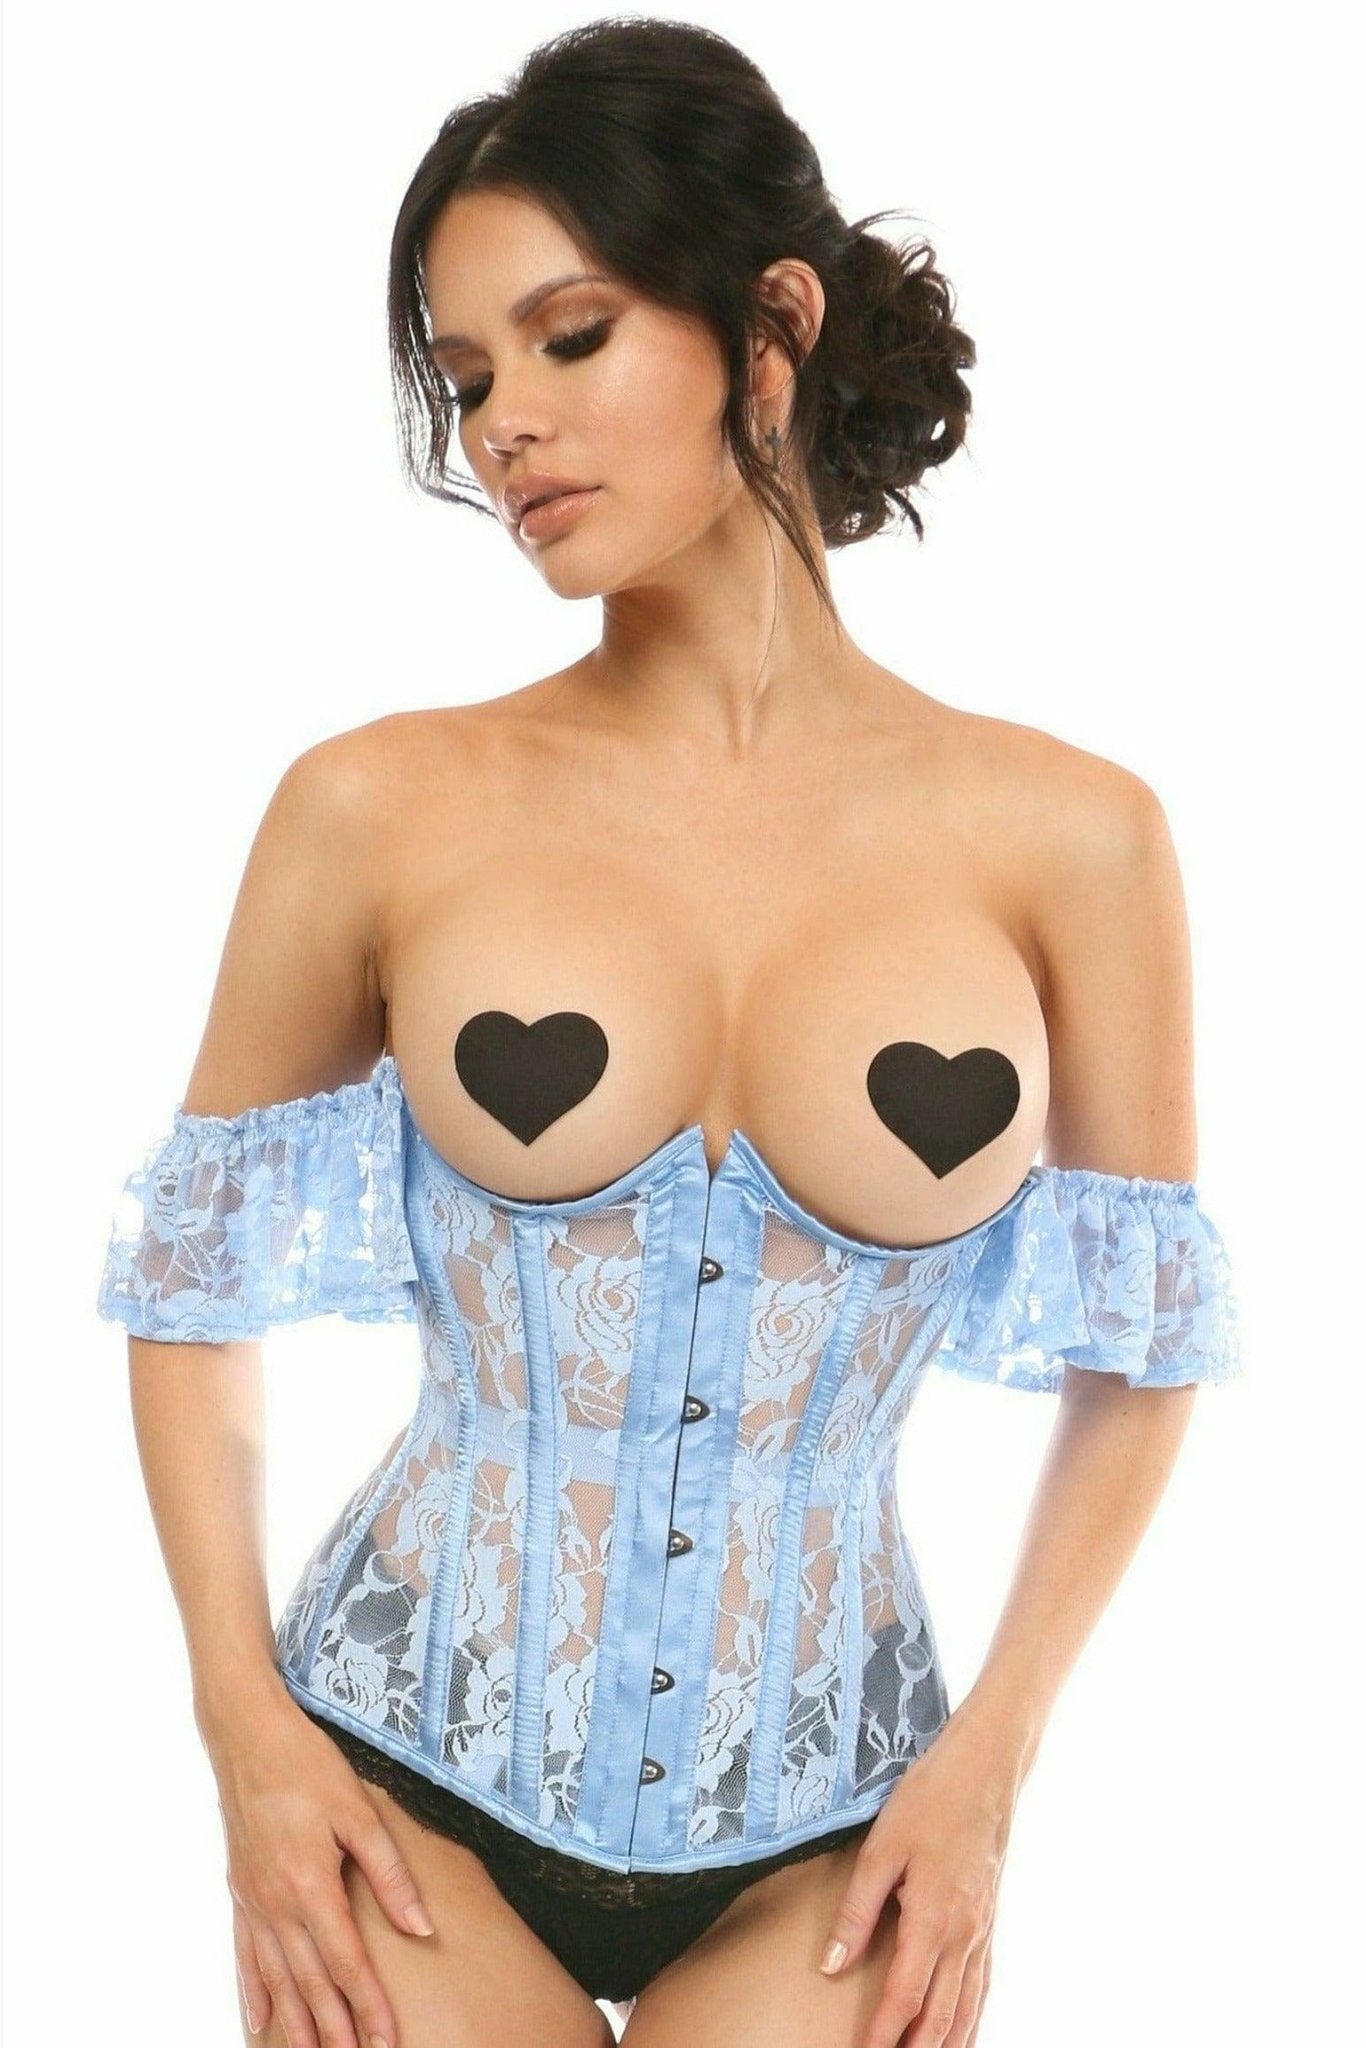 Sexy Sheer Light Blue Lace Underbust Underwire Corset with Ruffle Sleeve Musotica.com